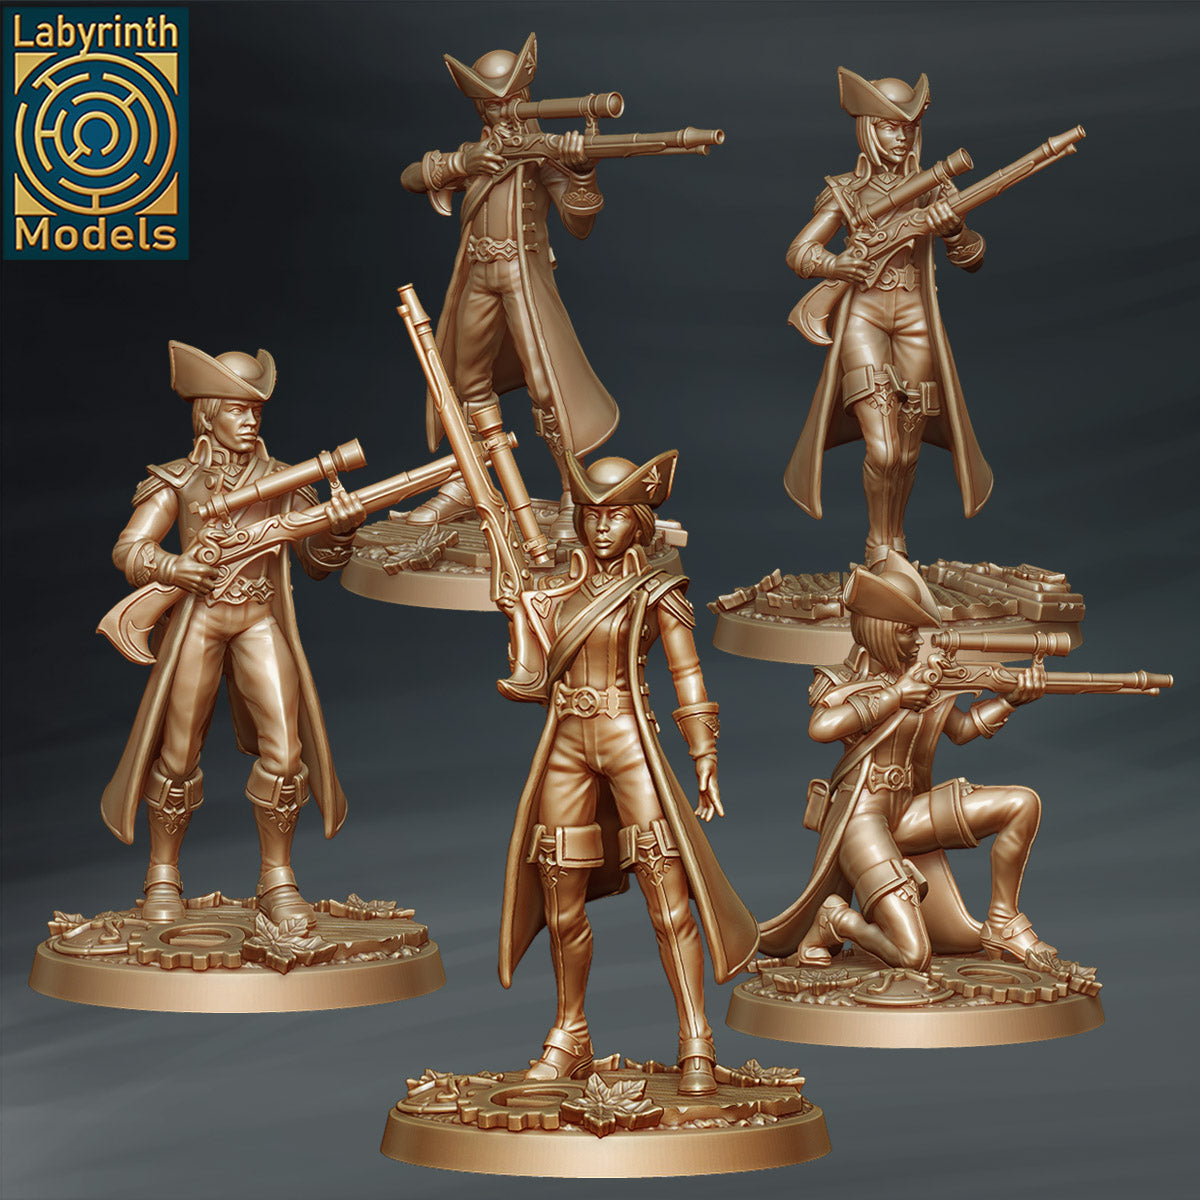 Magitek Empire Chasseurs by Labyrinth Models